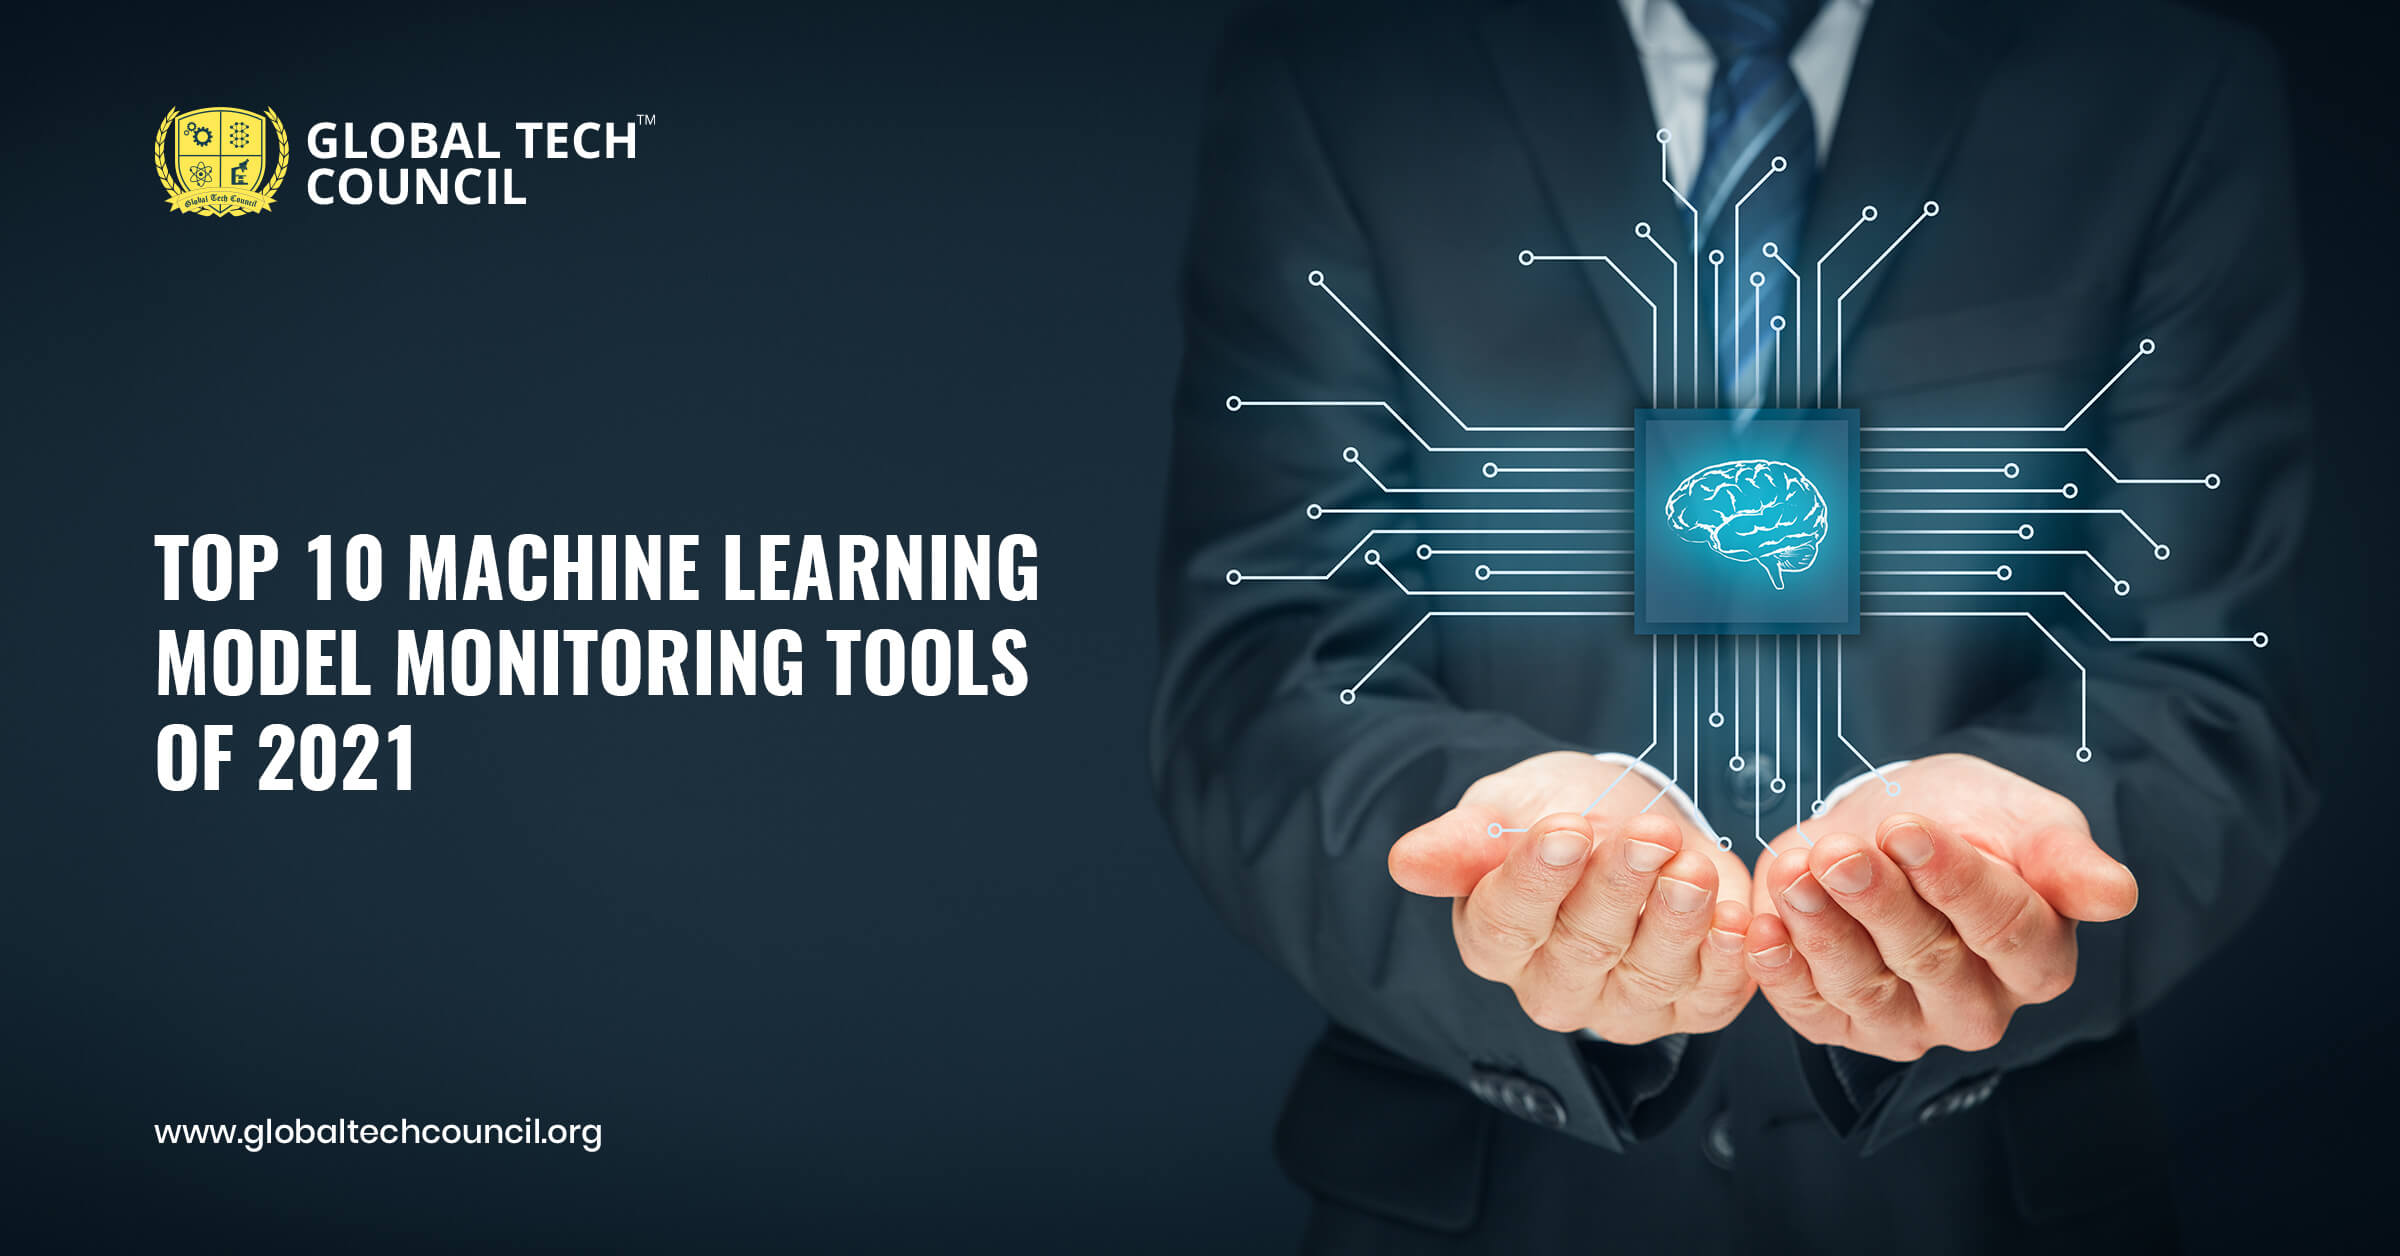 Top 10 Machine Learning Model Monitoring Tools of 2021